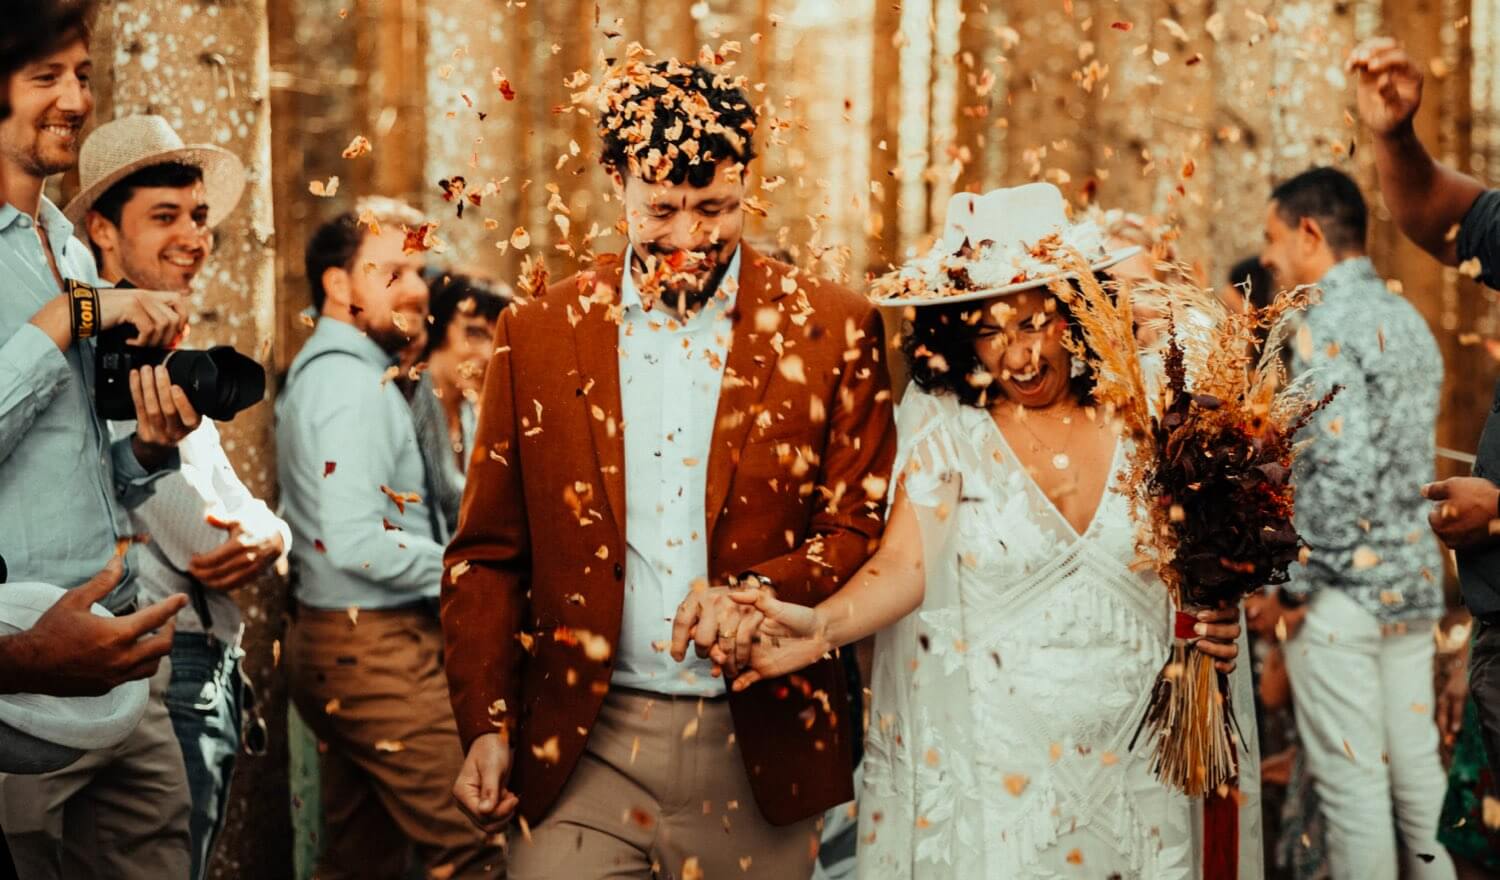 A couple being showered in confetti